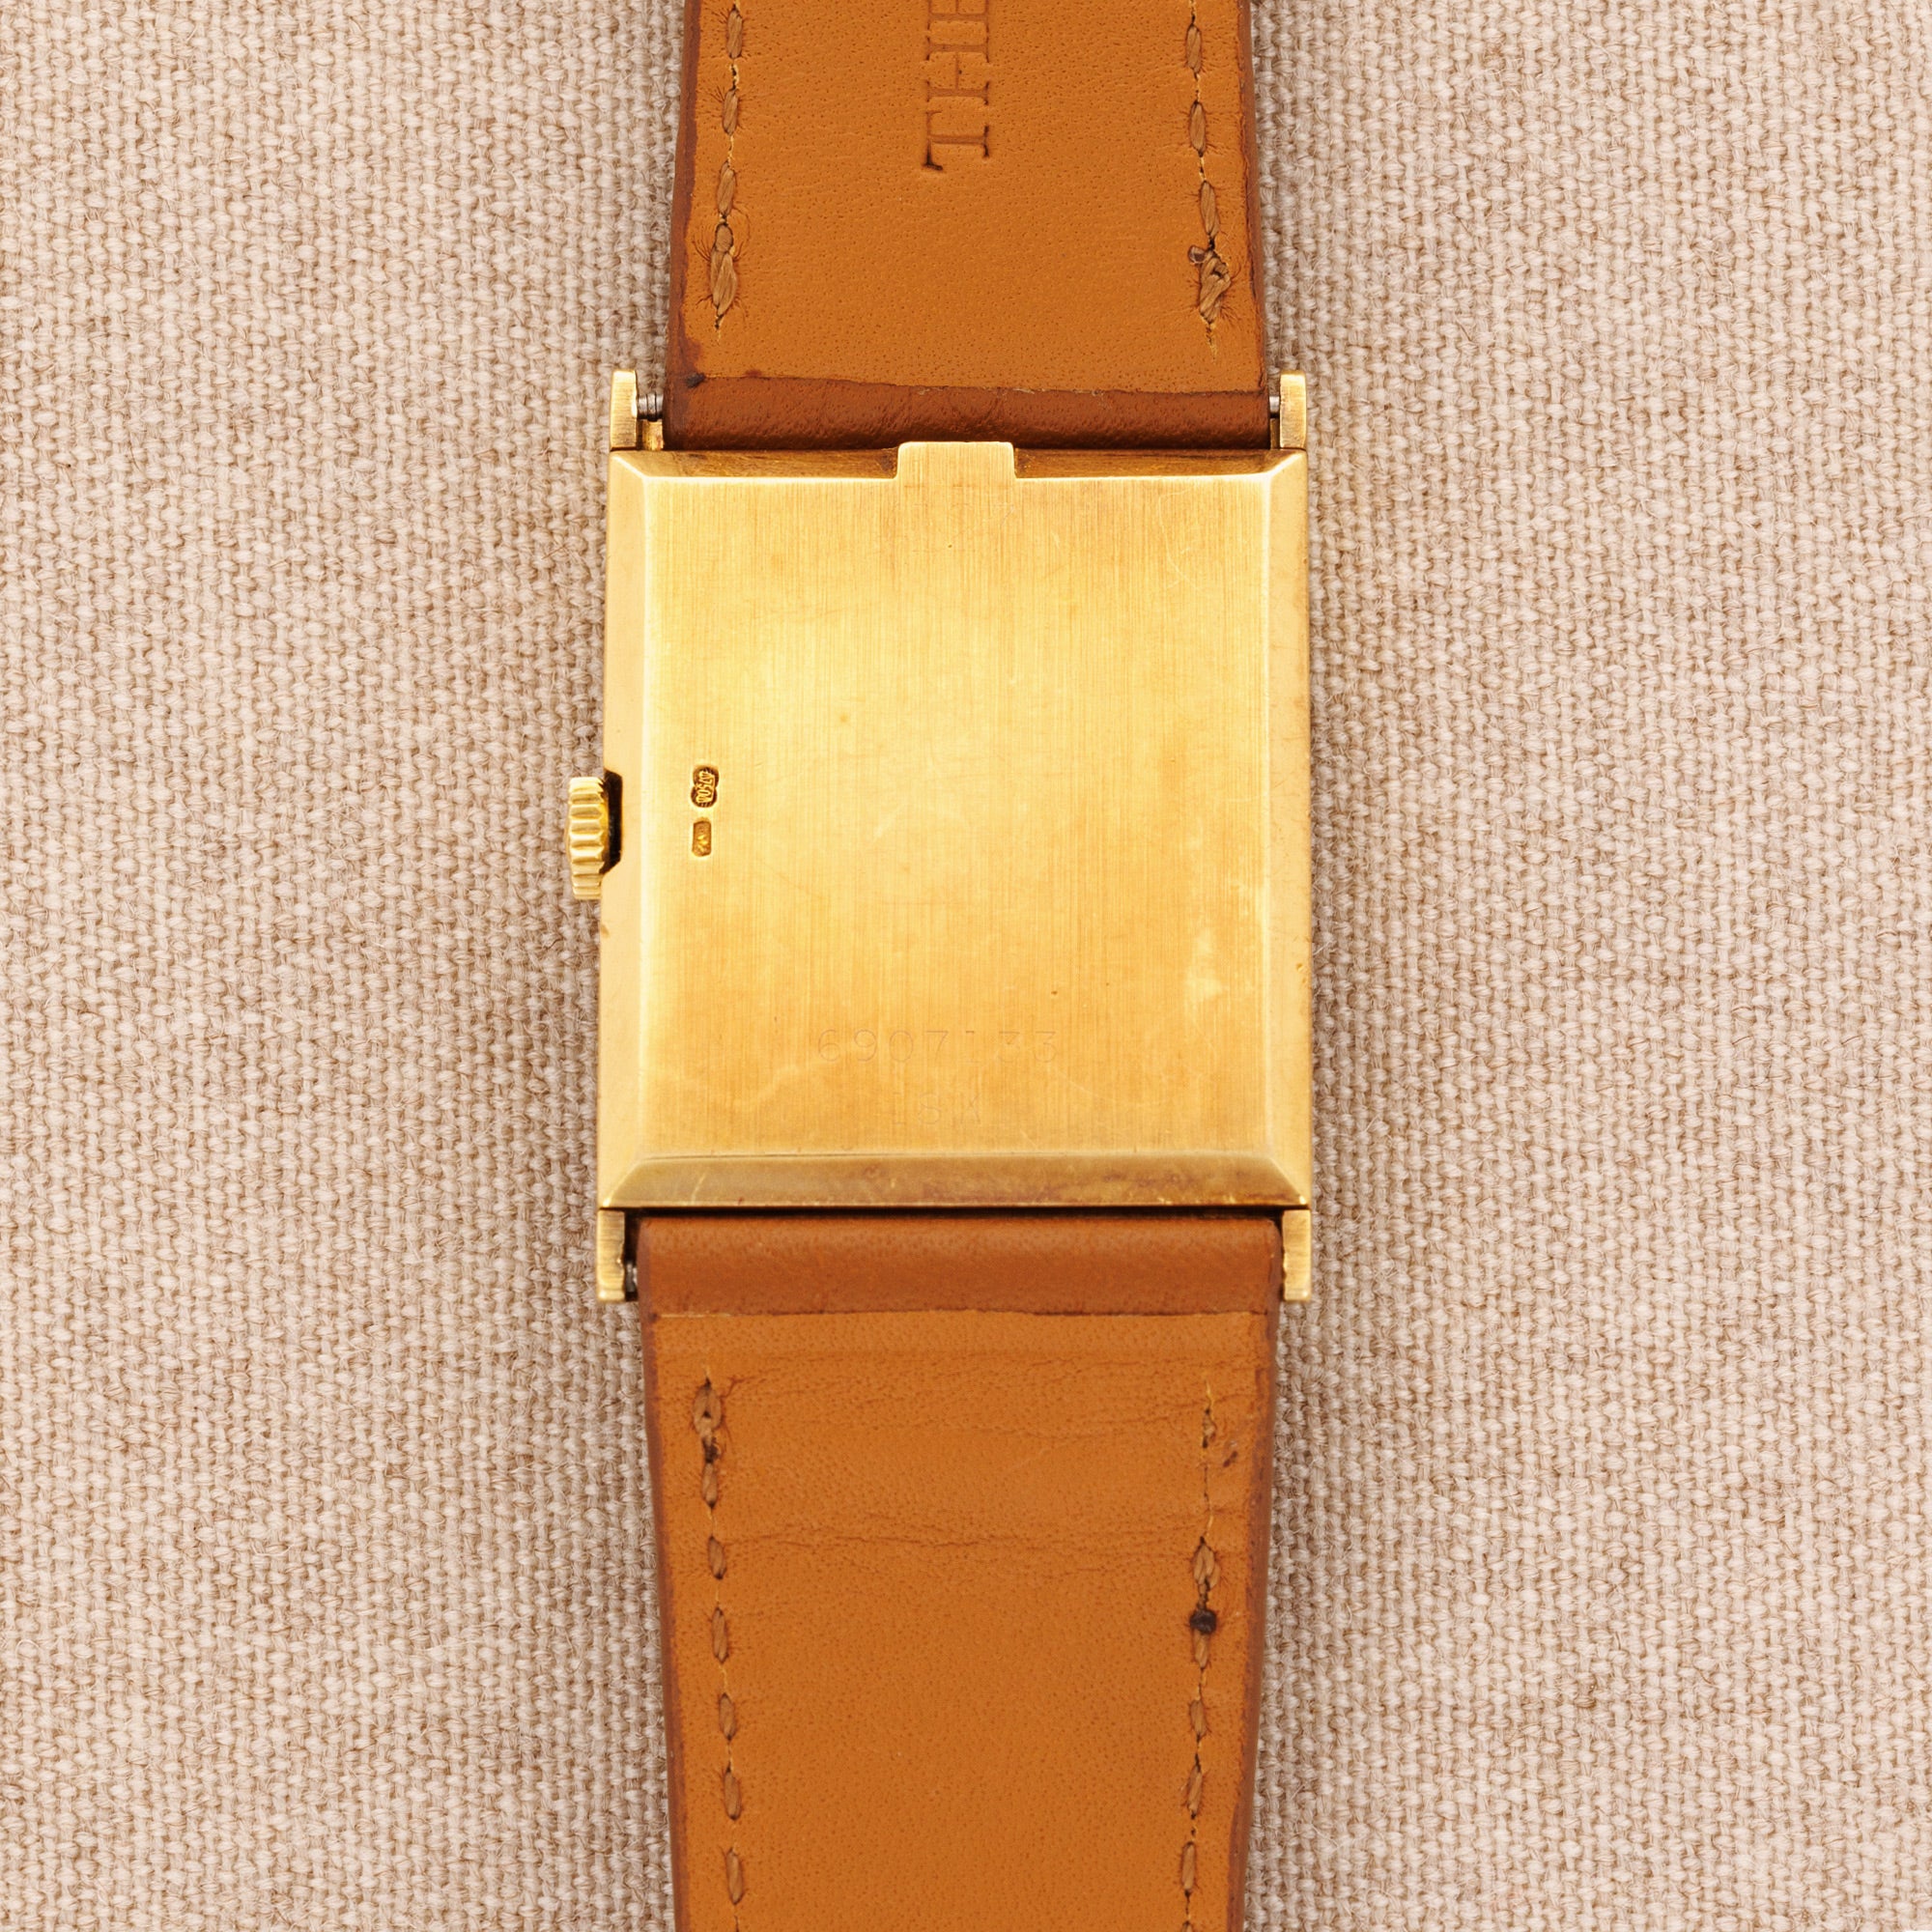 Rolex - Rolex Yellow Gold Mechanical Cellini Ref. 4127 - The Keystone Watches